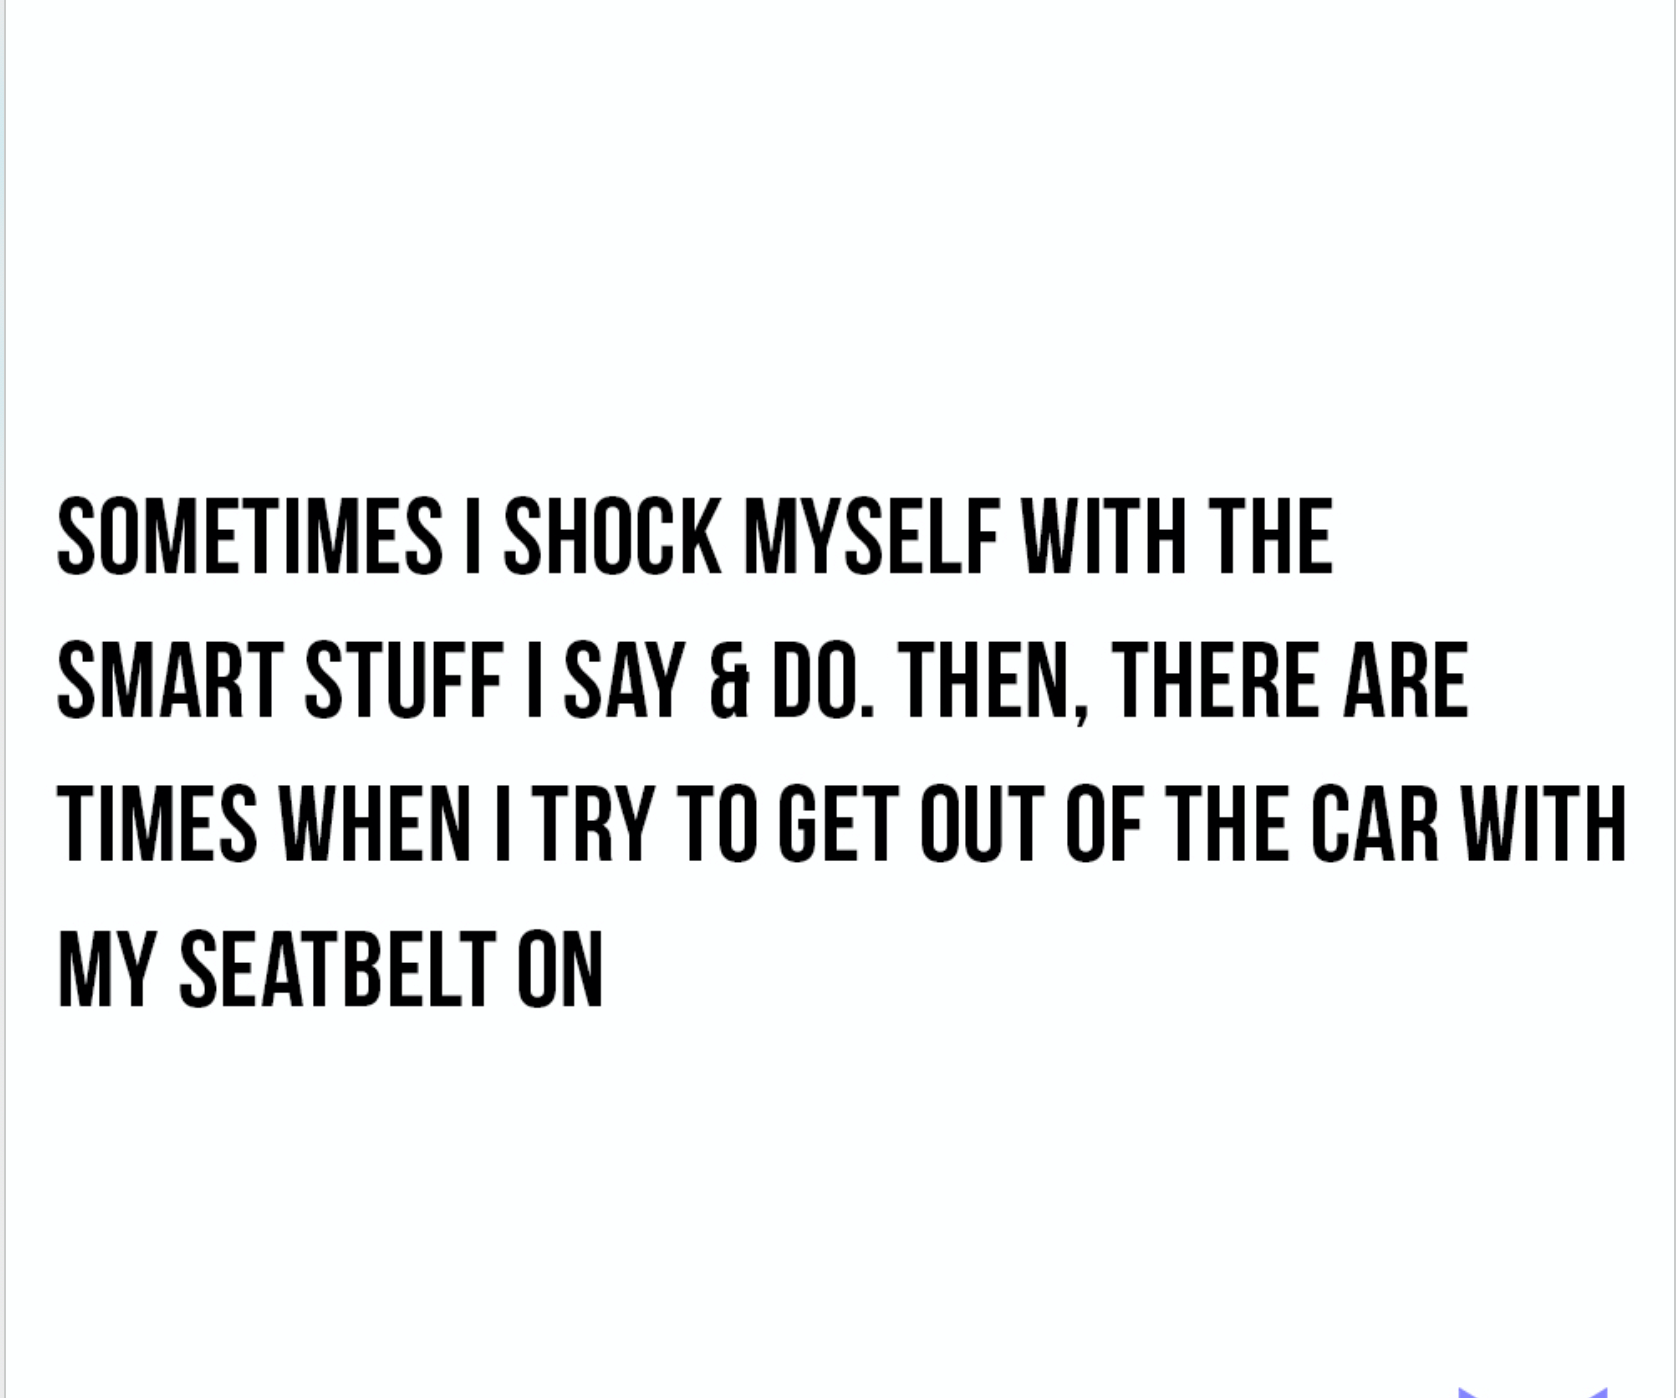 document - Sometimes I Shock Myself With The Smart Stuff I Say & Do. Then, There Are Times When I Try To Get Out Of The Car With My Seatbelt On